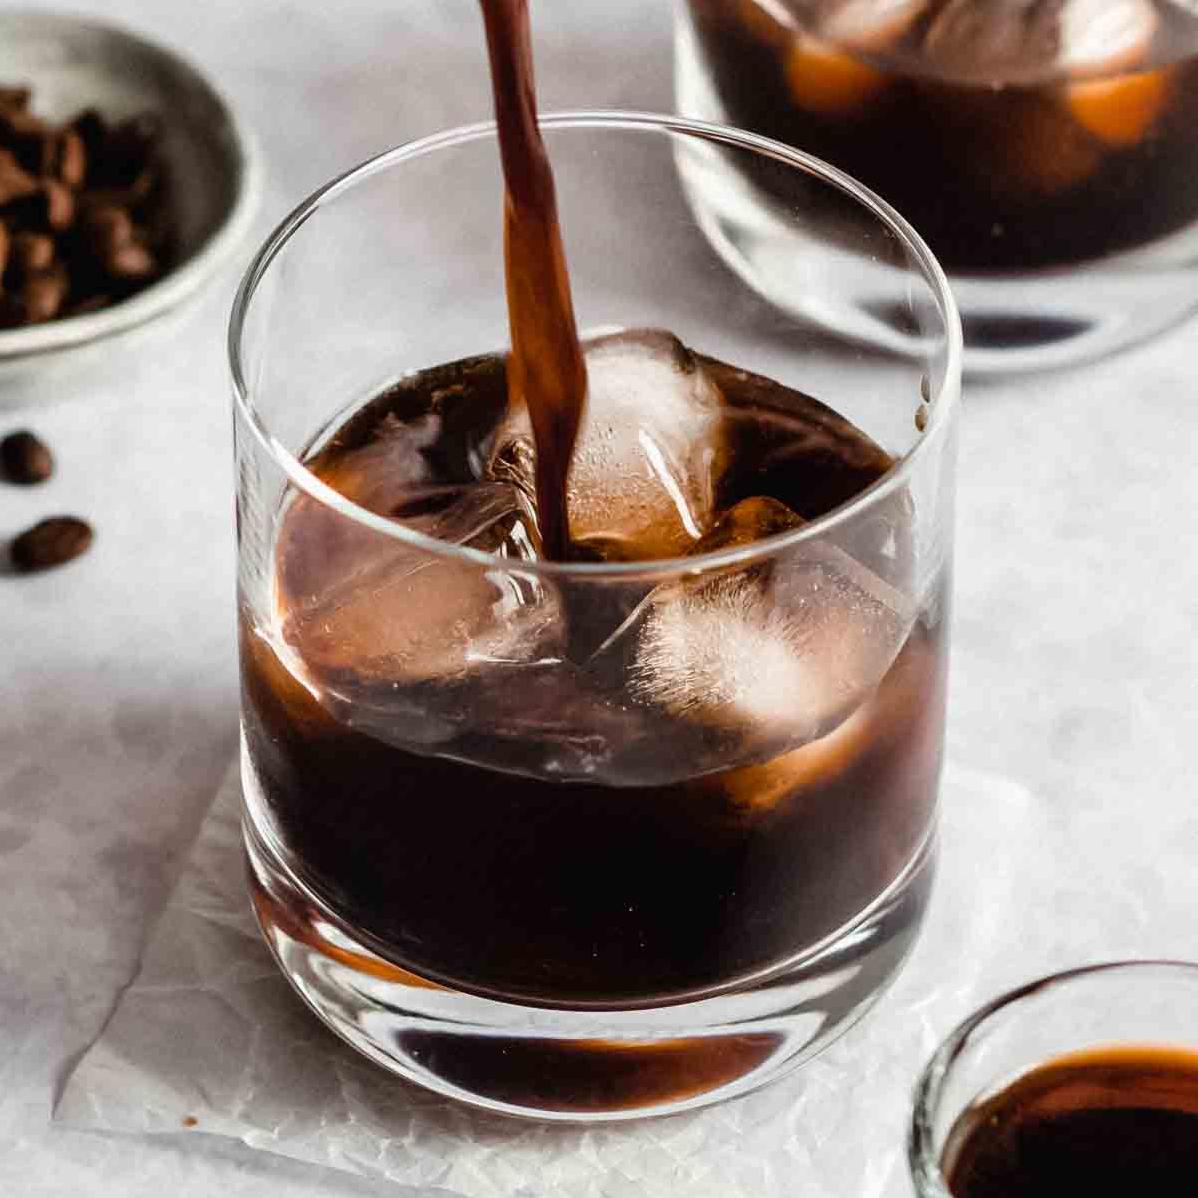  With this coffee concentrate, you'll have a barista-worthy cup in minutes!